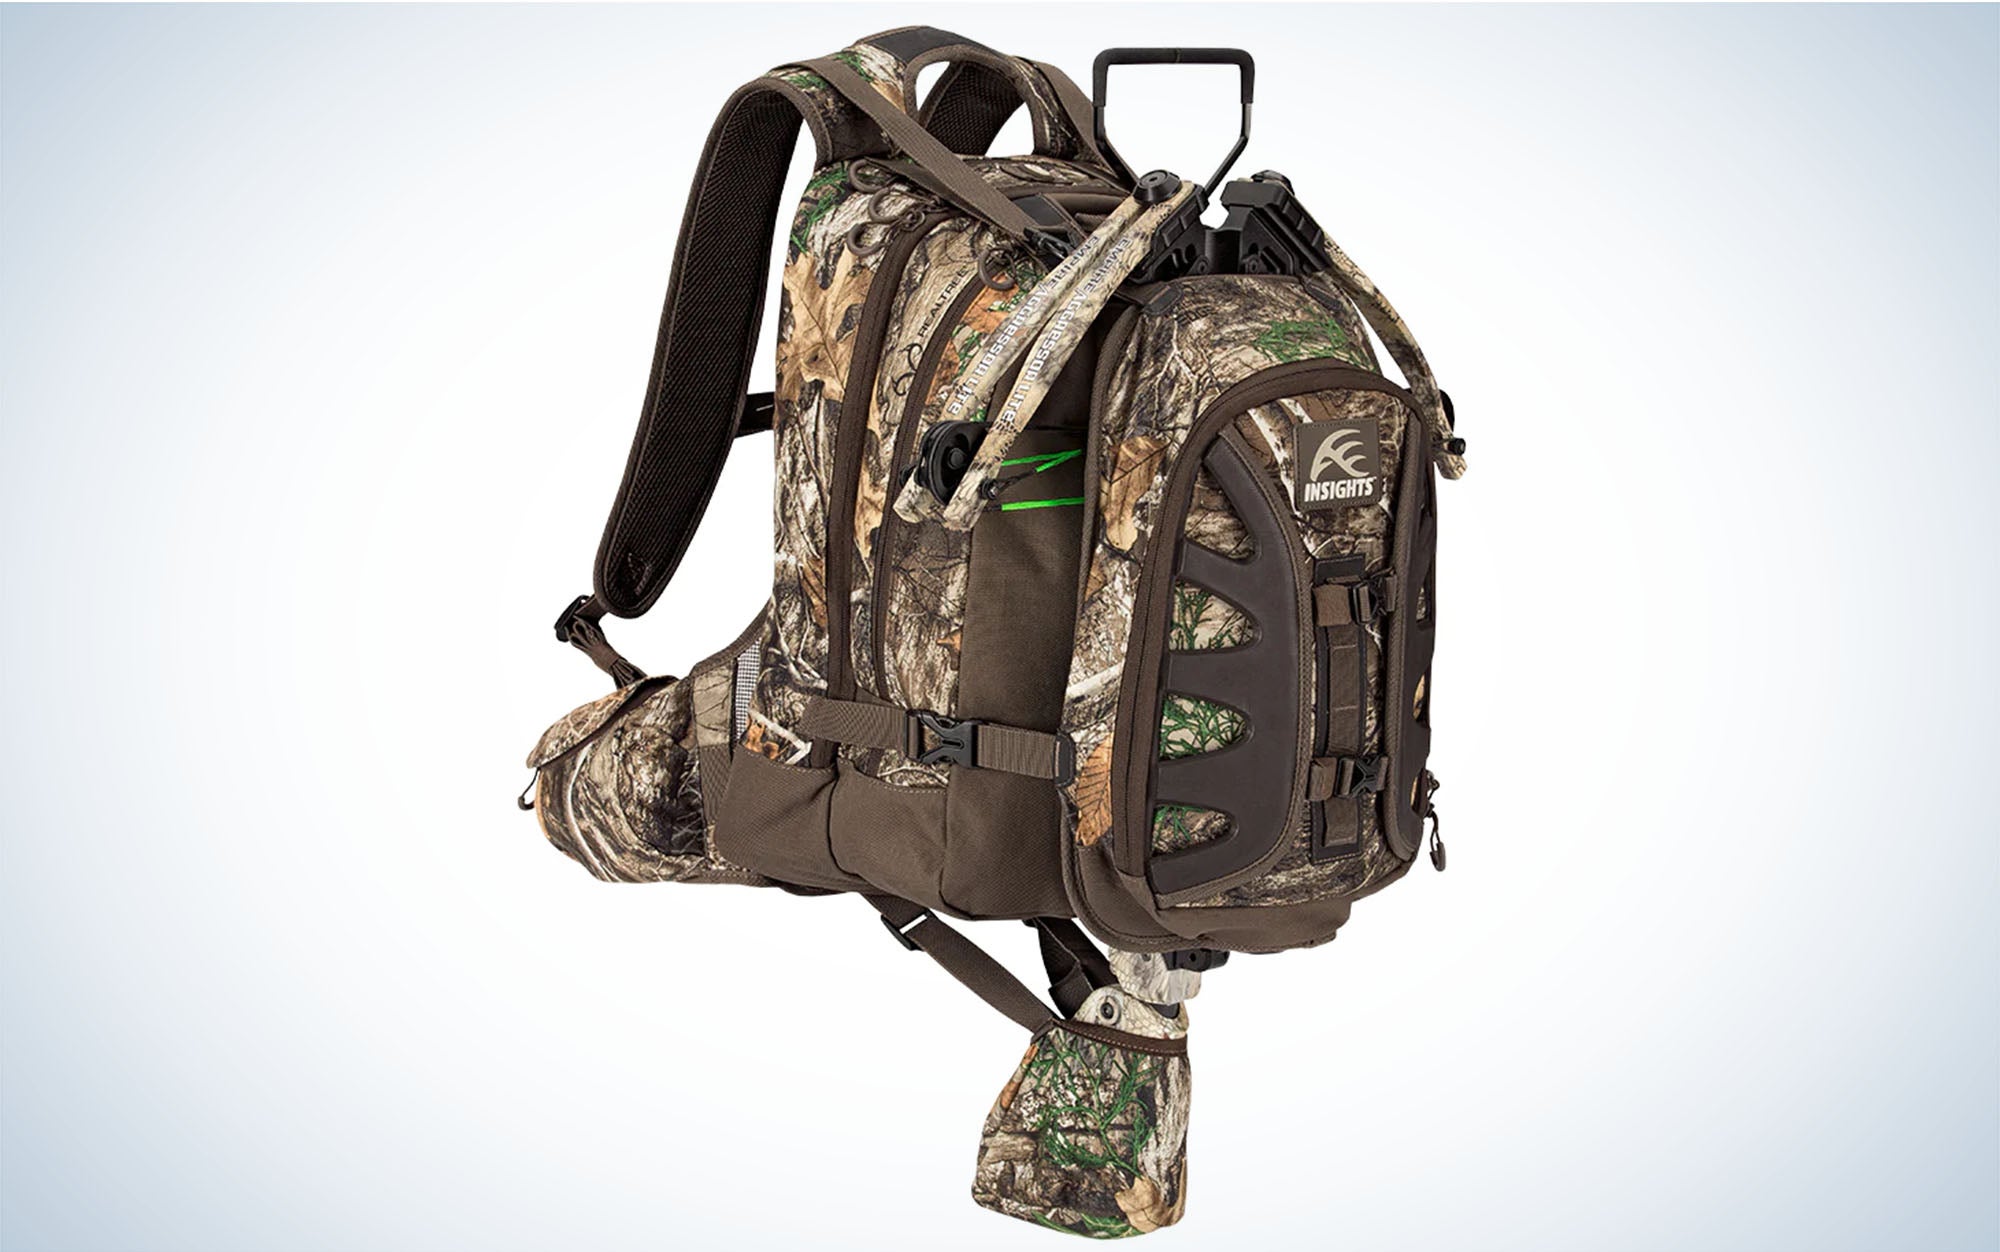 The Insights Shift is the best hunting backpack for crossbows.